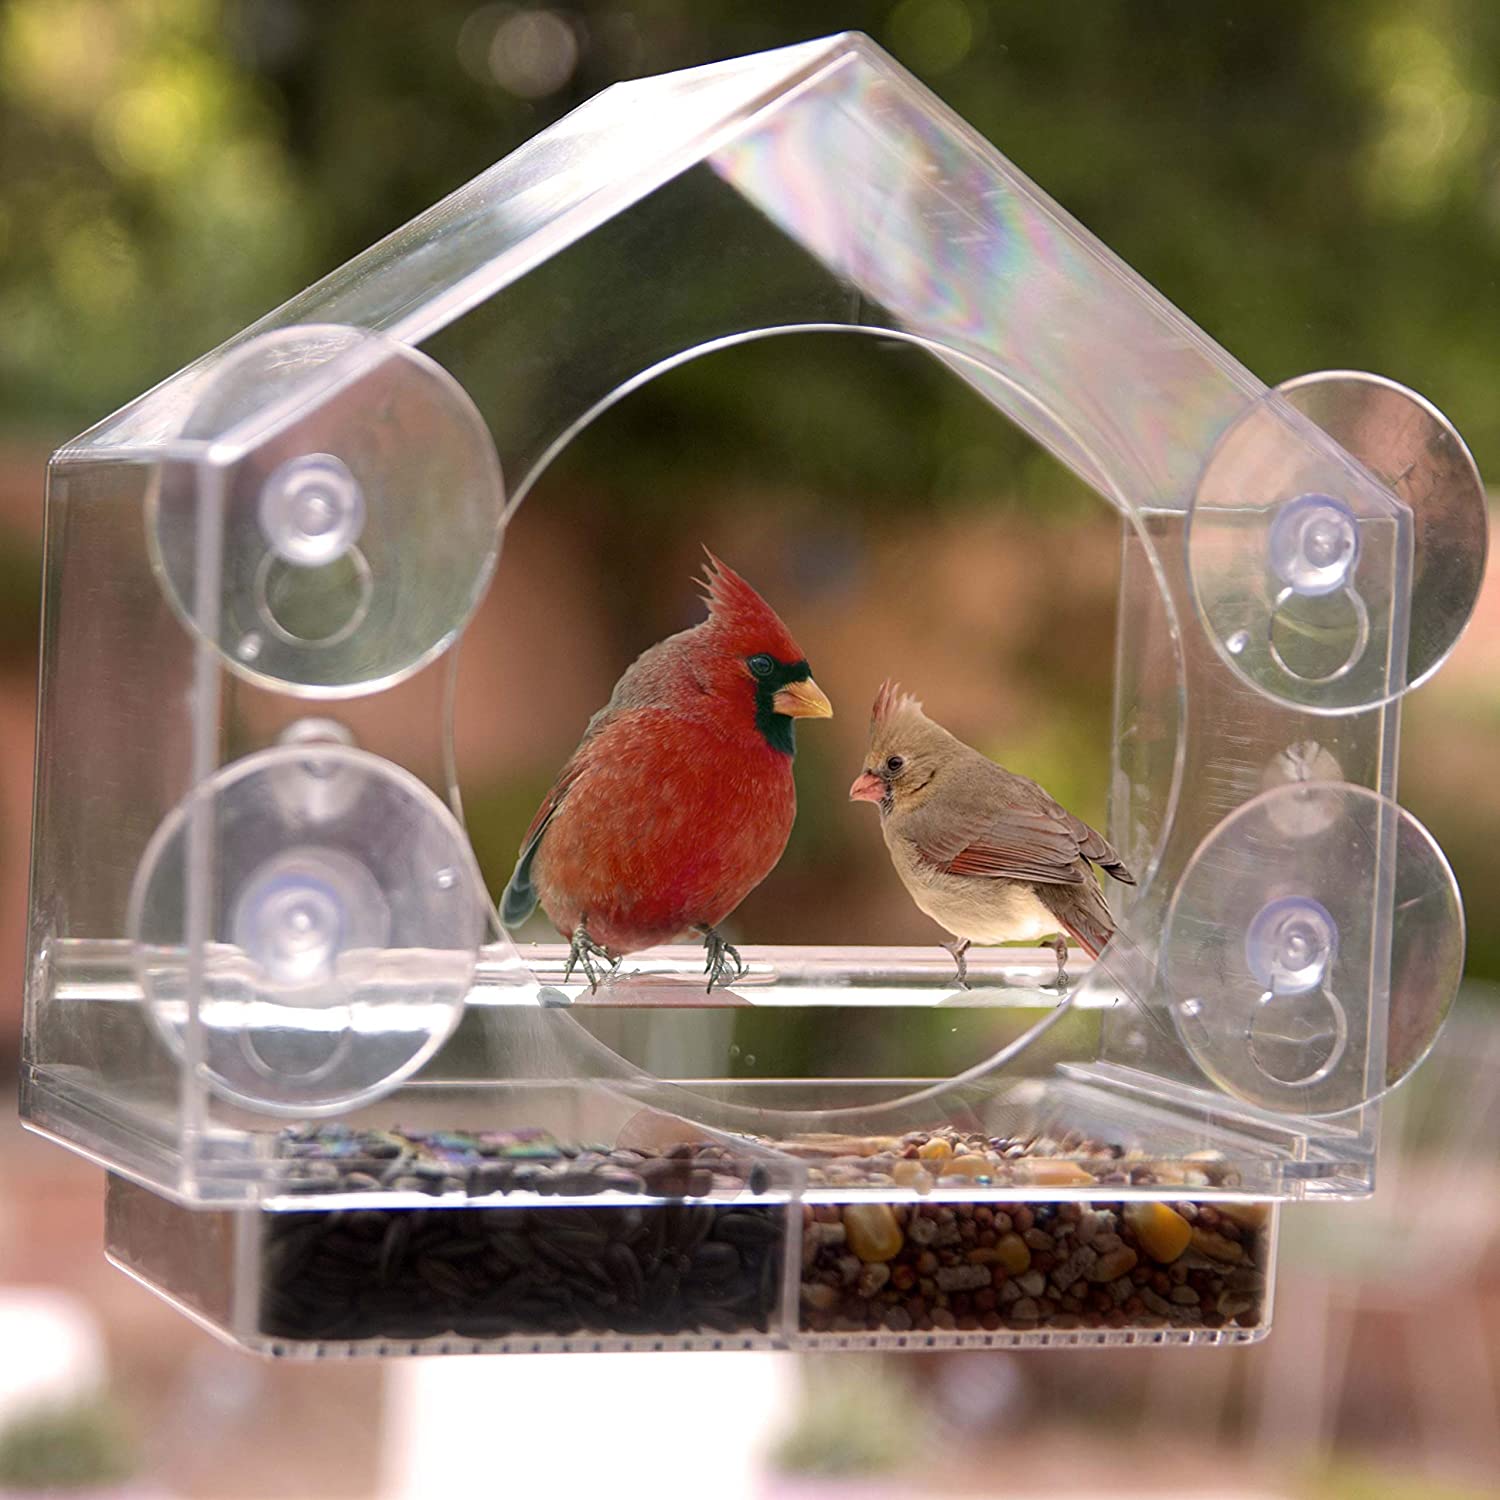 Nature Anywhere Window Bird House Feeder, The 50 Best and Enticing Gifts for Grandparents in 2022